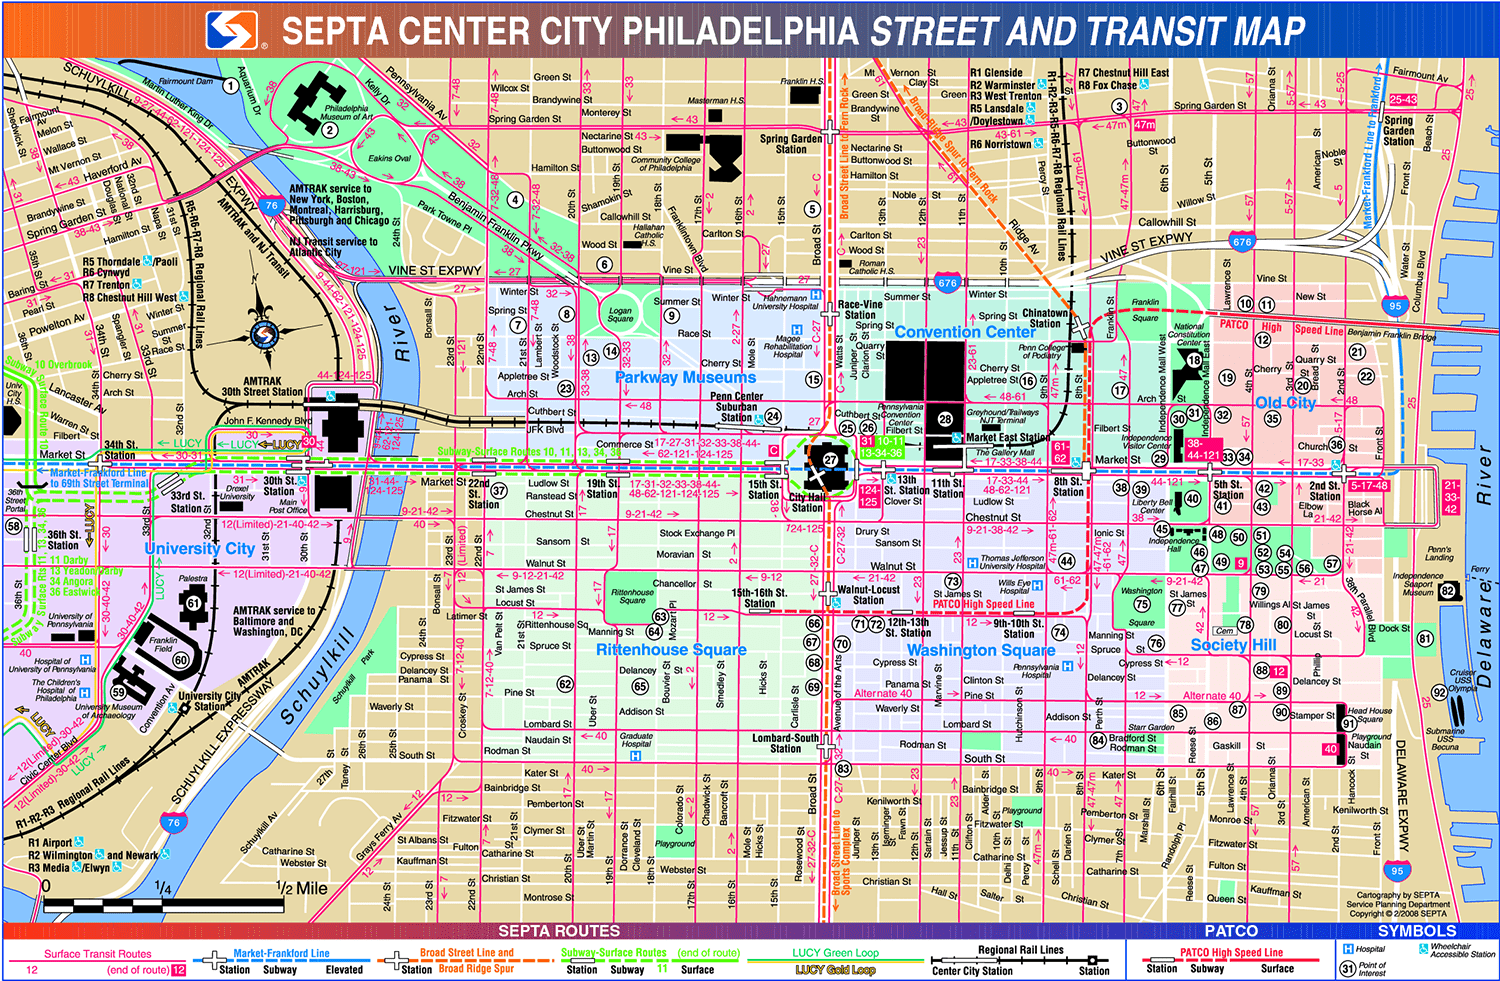 Philly-STreet-map-min.png